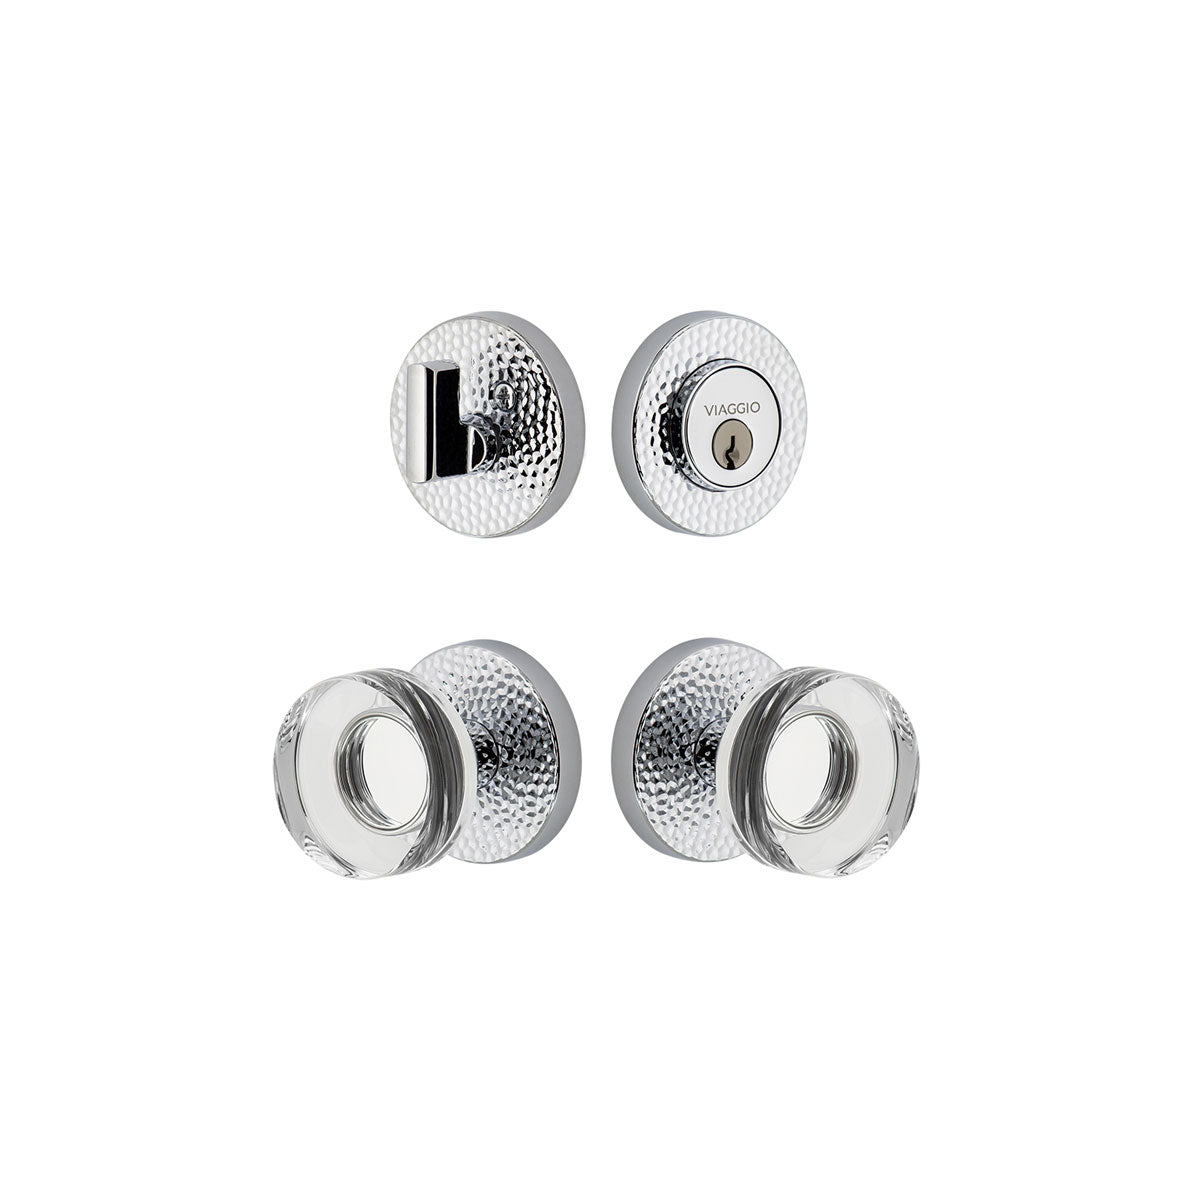 Circolo Hammered Rosette Entry Set with Circolo Crystal Knob in Bright Chrome